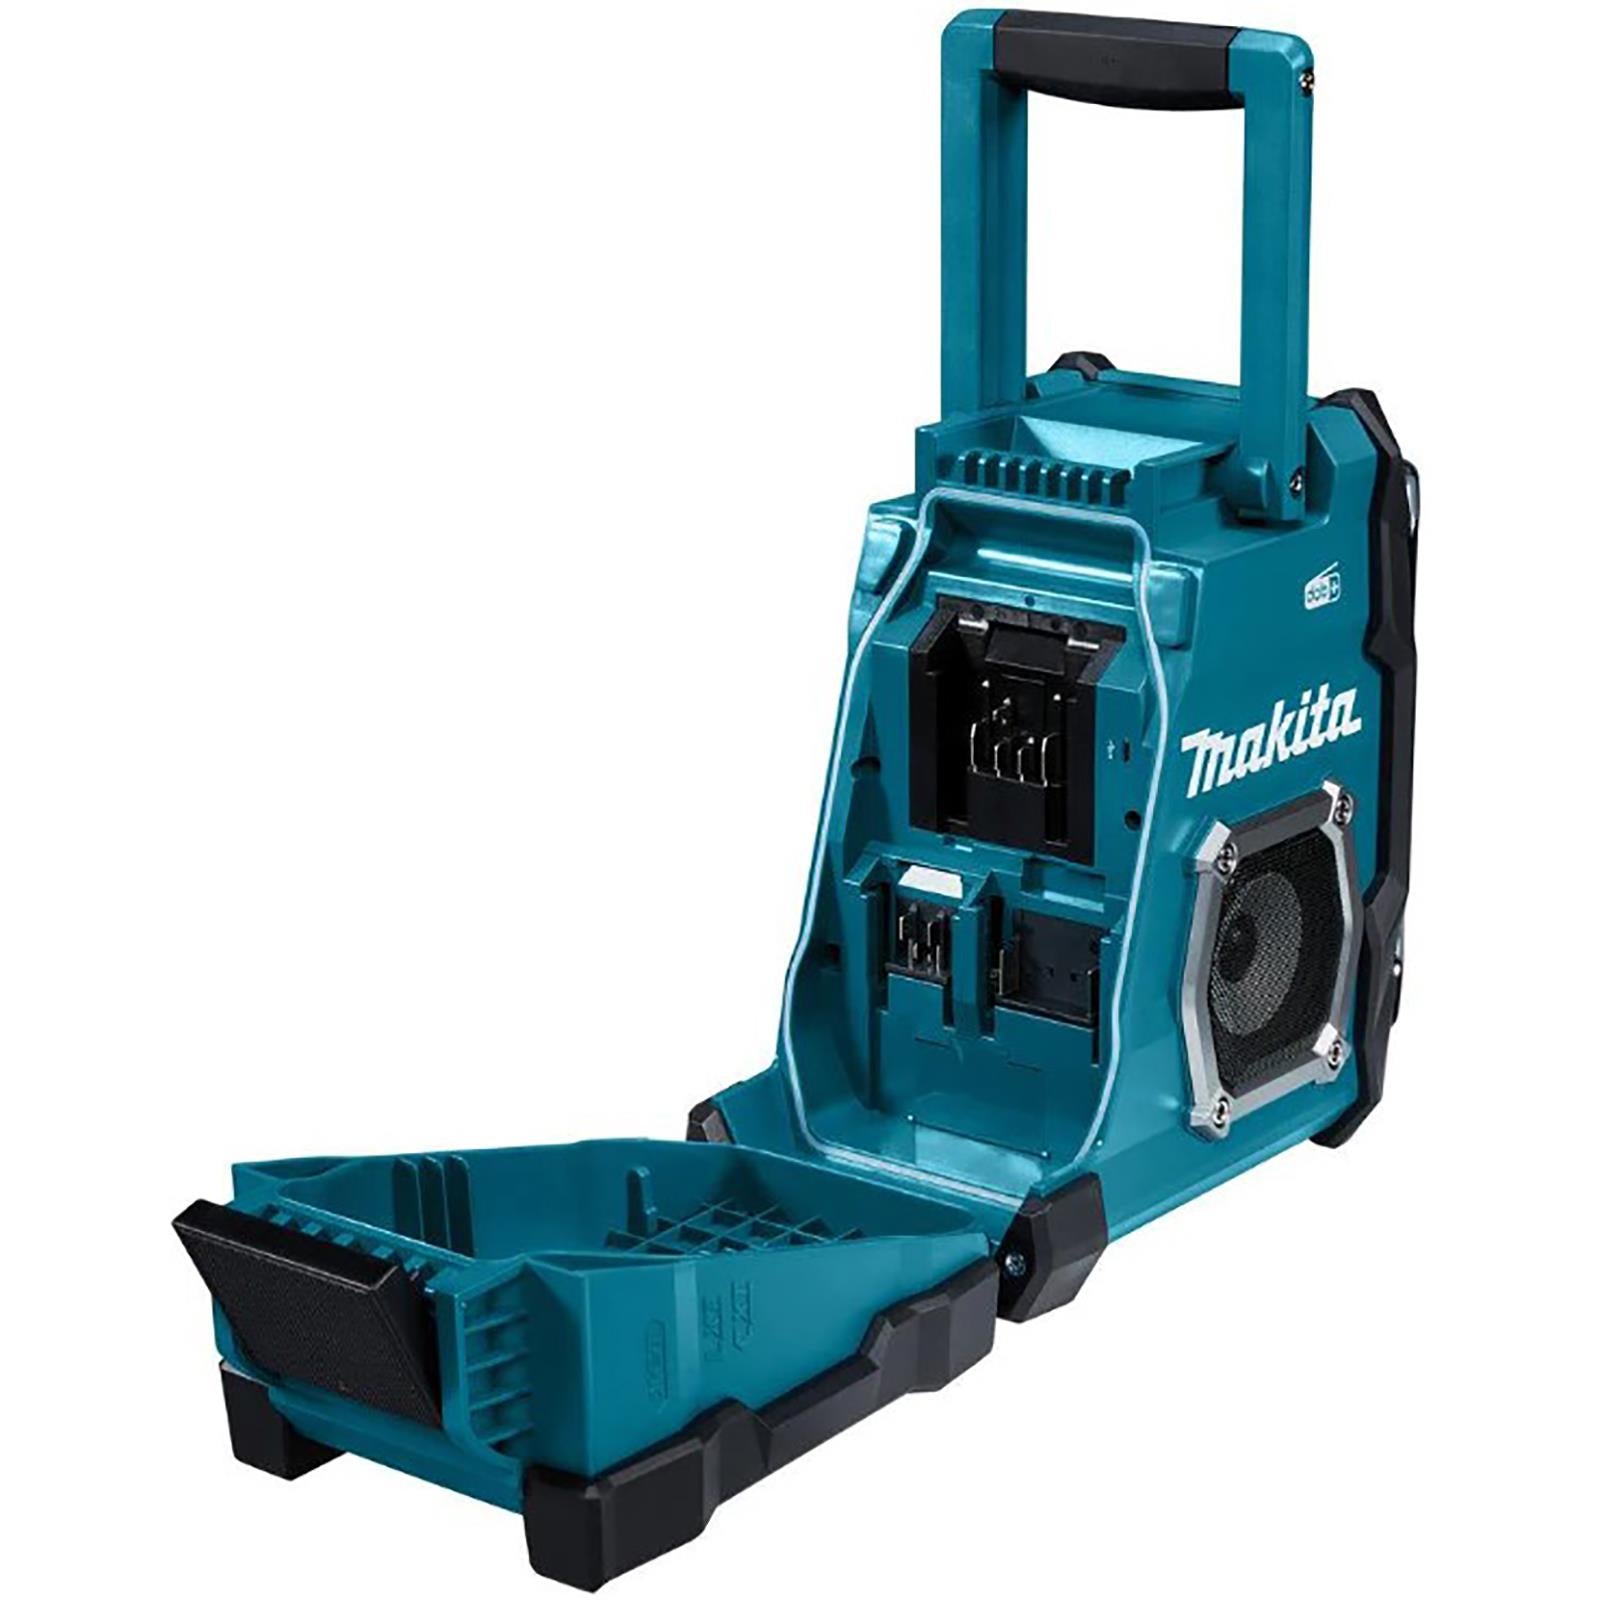 Makita DAB Radio Job Site Work Cordless CXT LXT XGT Phone Charger USB AUX MR003GZ Body Only